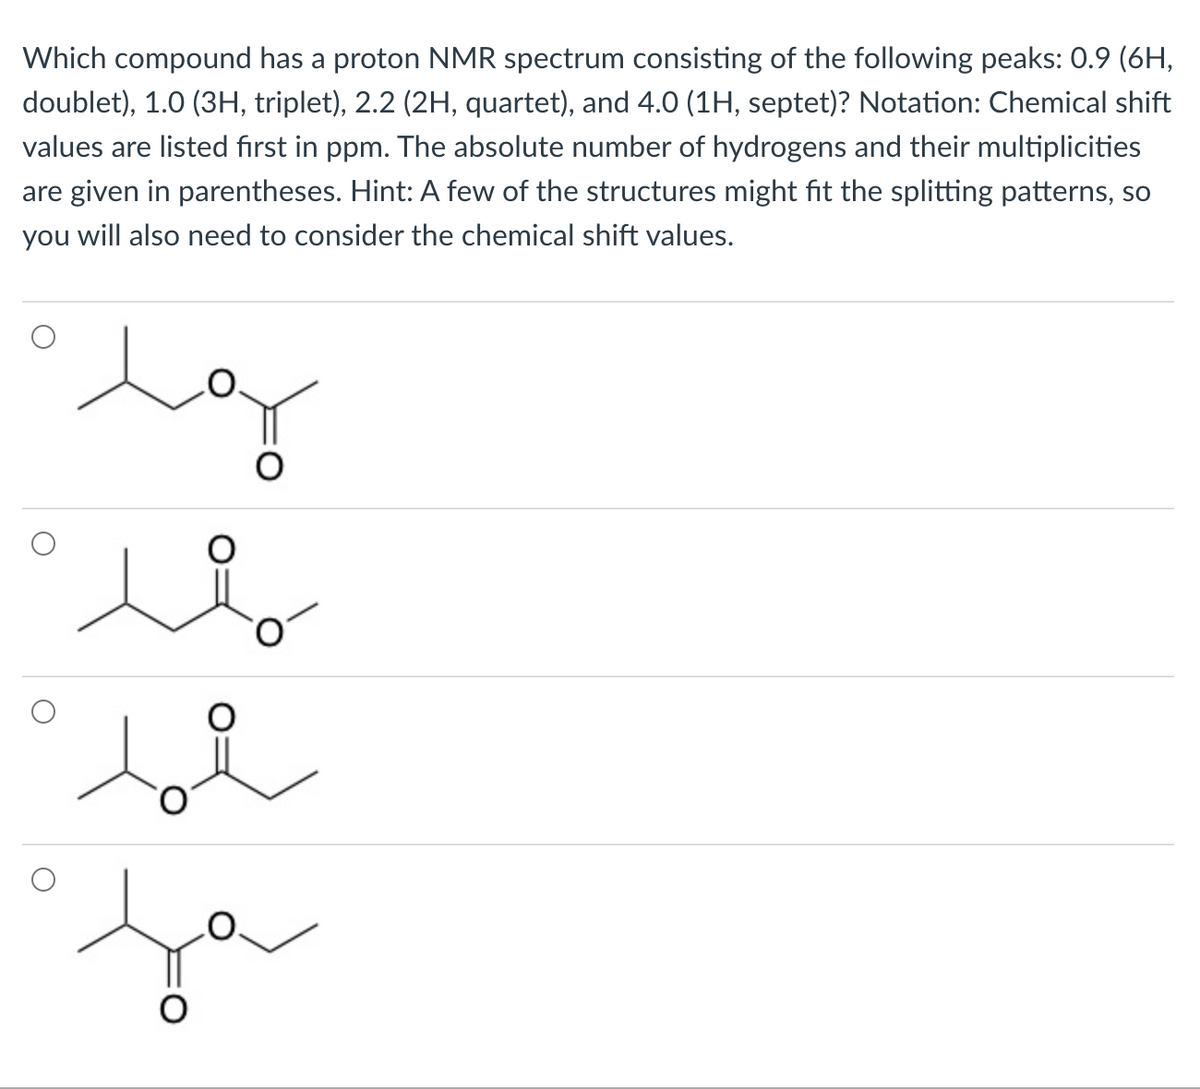 Which compound has a proton NMR spectrum consisting of the following peaks: 0.9 (6H,
doublet), 1.0 (3H, triplet), 2.2 (2H, quartet), and 4.0 (1H, septet)? Notation: Chemical shift
values are listed first in ppm. The absolute number of hydrogens and their multiplicities
are given in parentheses. Hint: A few of the structures might fit the splitting patterns, so
you will also need to consider the chemical shift values.
